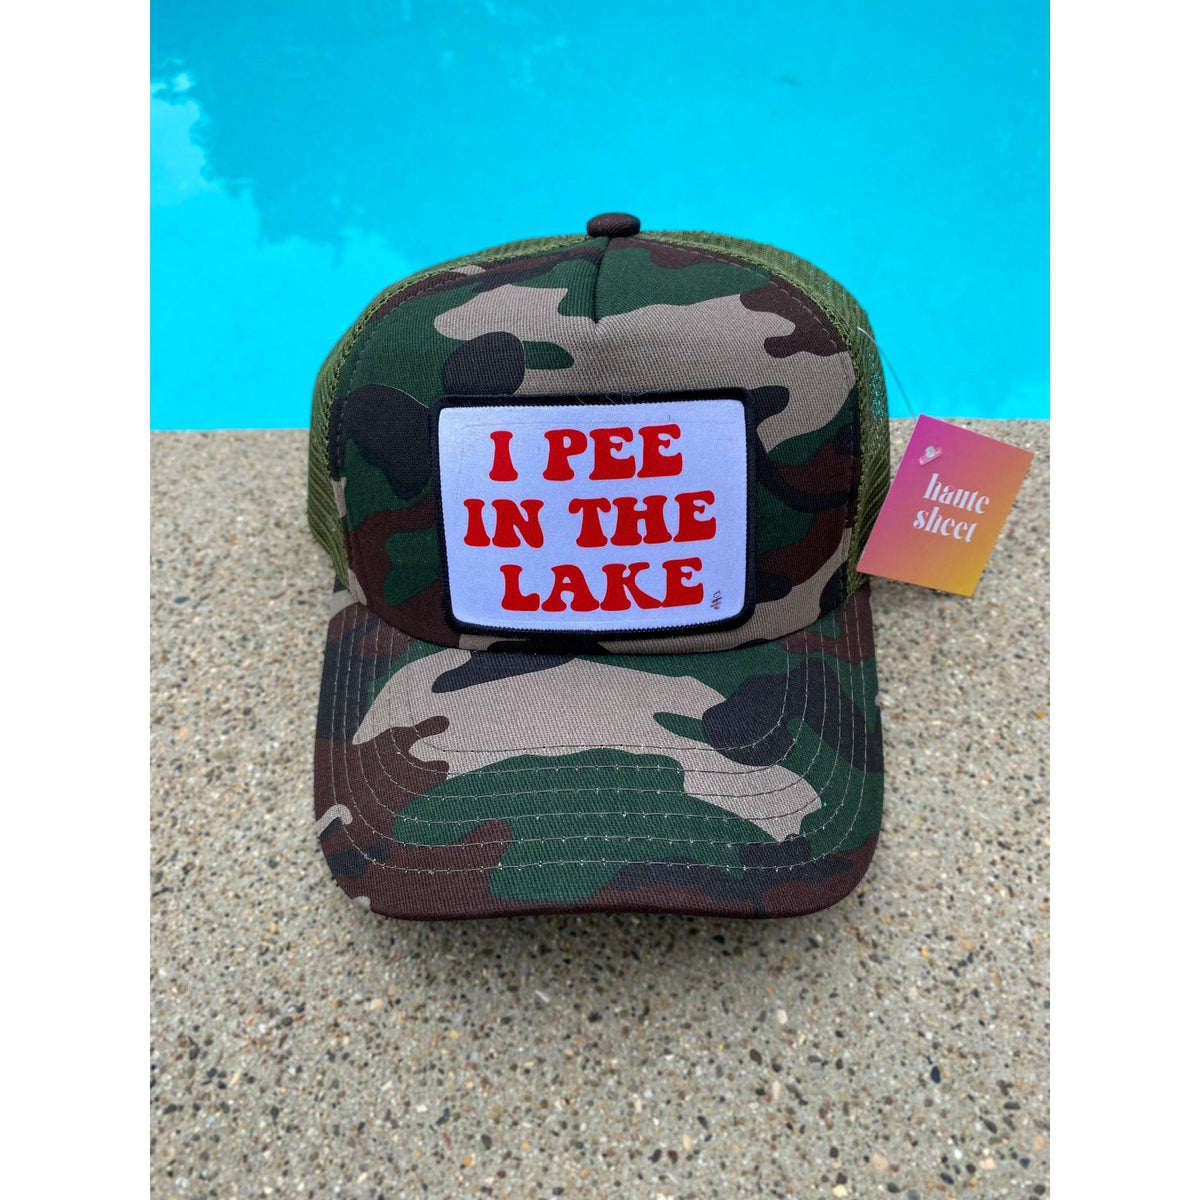 I Pee In The Lake | Patch Trucker Hat | Haute Sheet Trucker Hat Hats TheFringeCultureCollective